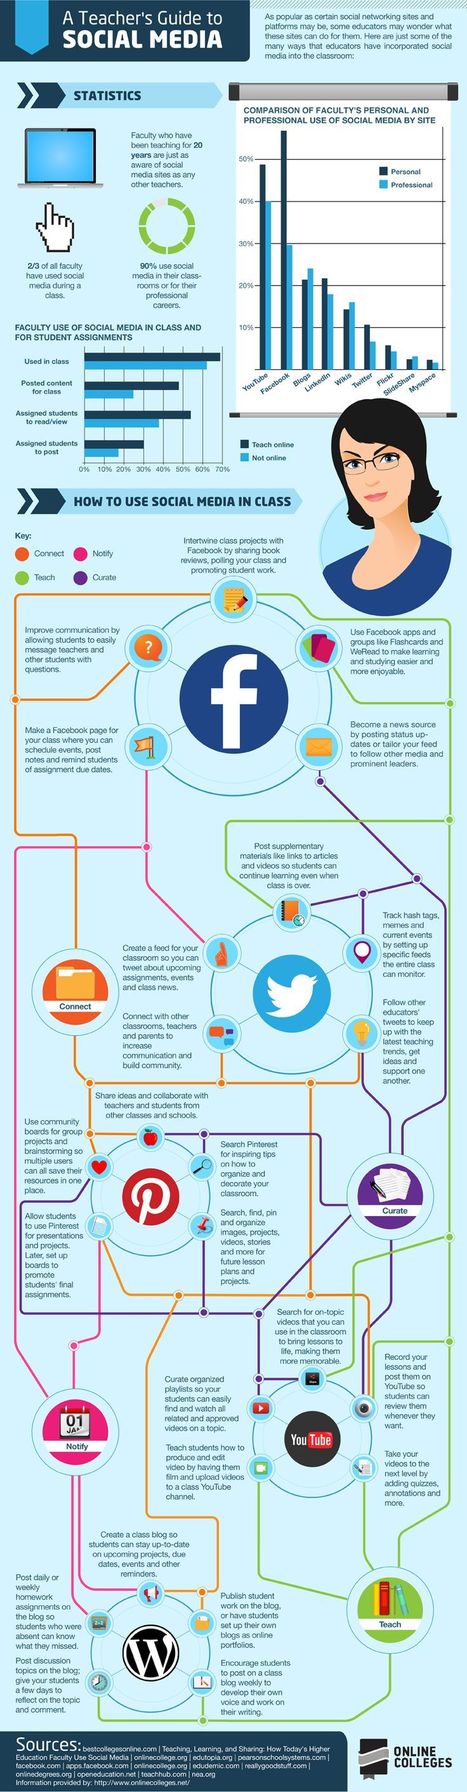 The essential teacher's guide to social media - Daily Genius | Distance Learning, mLearning, Digital Education, Technology | Scoop.it